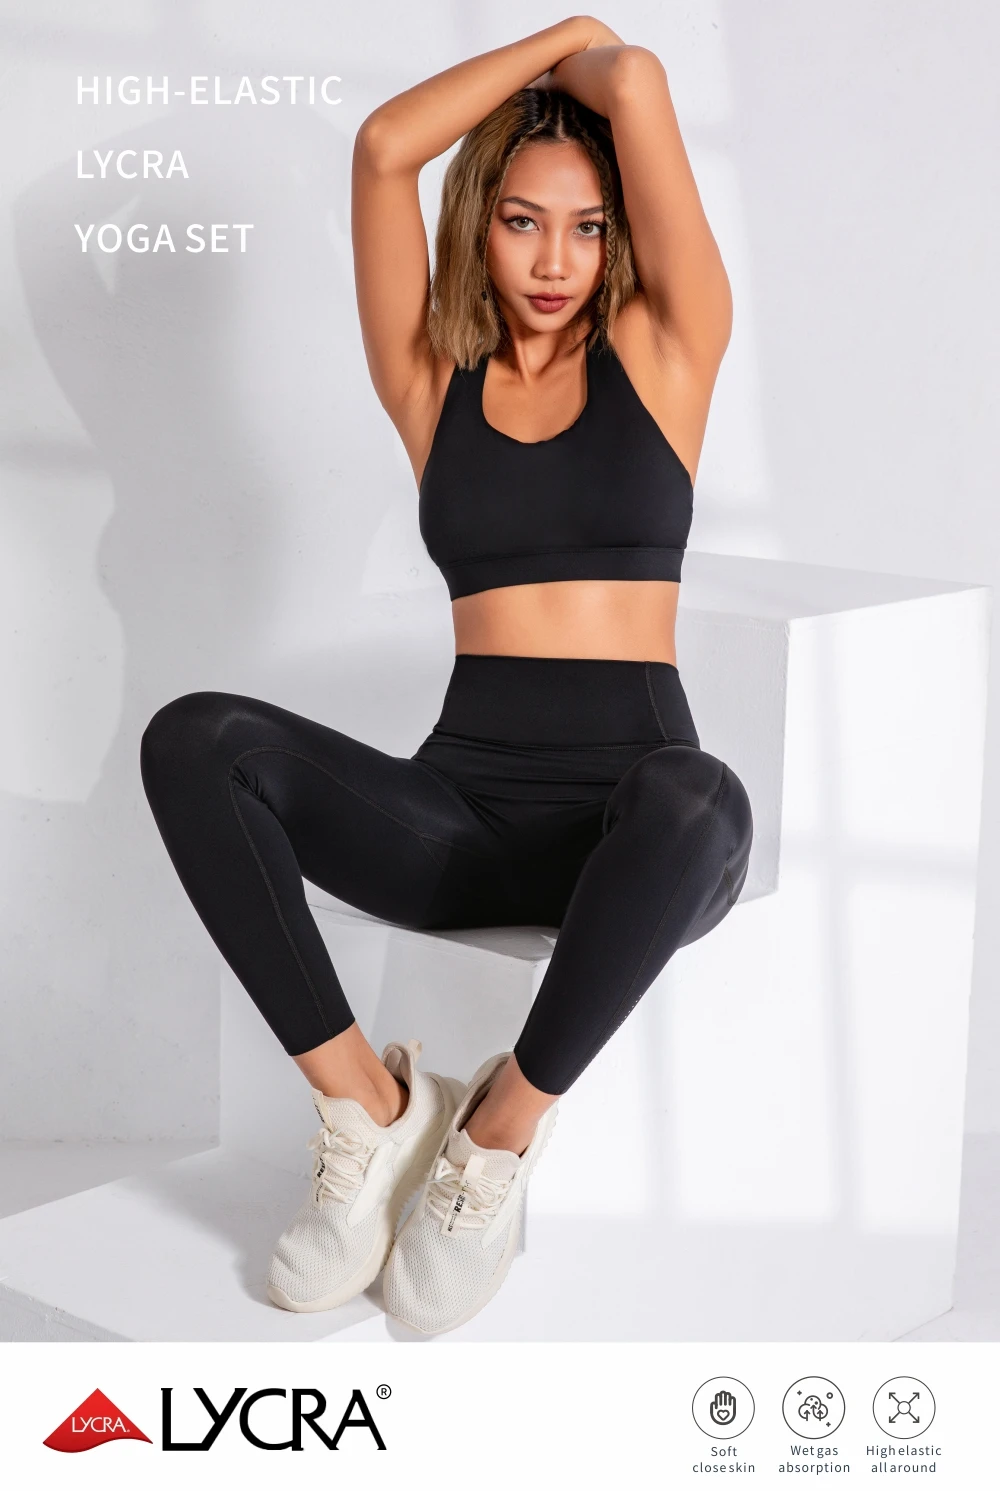 Workout Sets For Women 2 Piece High Waisted Leggings With Padded Sports Bra  Sets Yoga Outfit Jogging Gym Clothes - Buy Women 2 Piece High Waisted  Leggings With Padded Sports Bra,Sports Bra